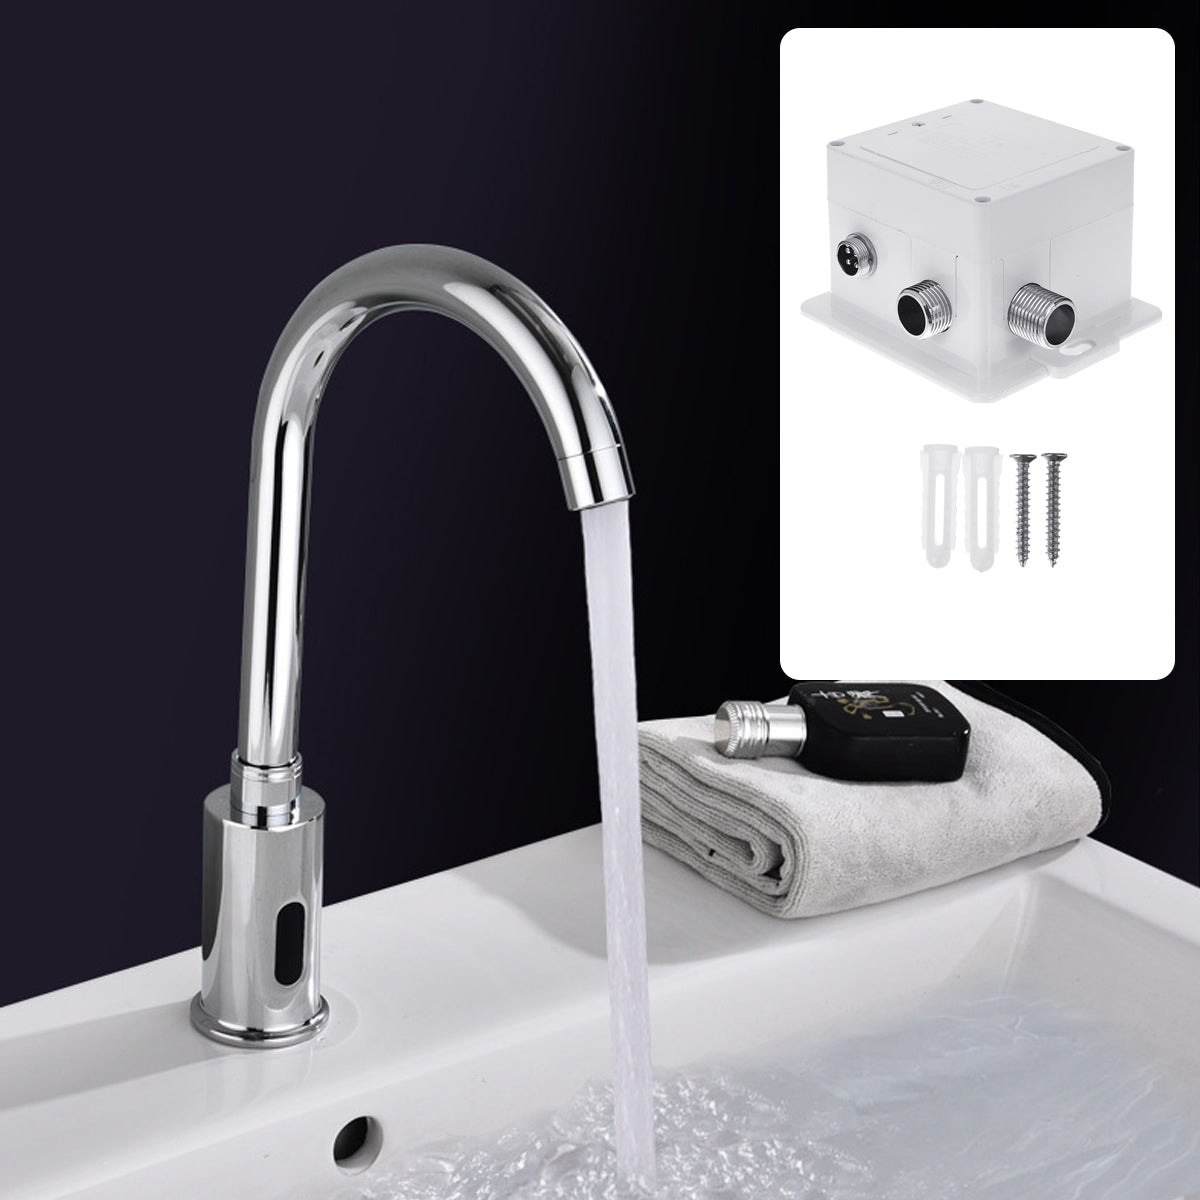 Infrared Sensor Kitchen Sink Faucet Smart Touchless Single Cold Water Tap